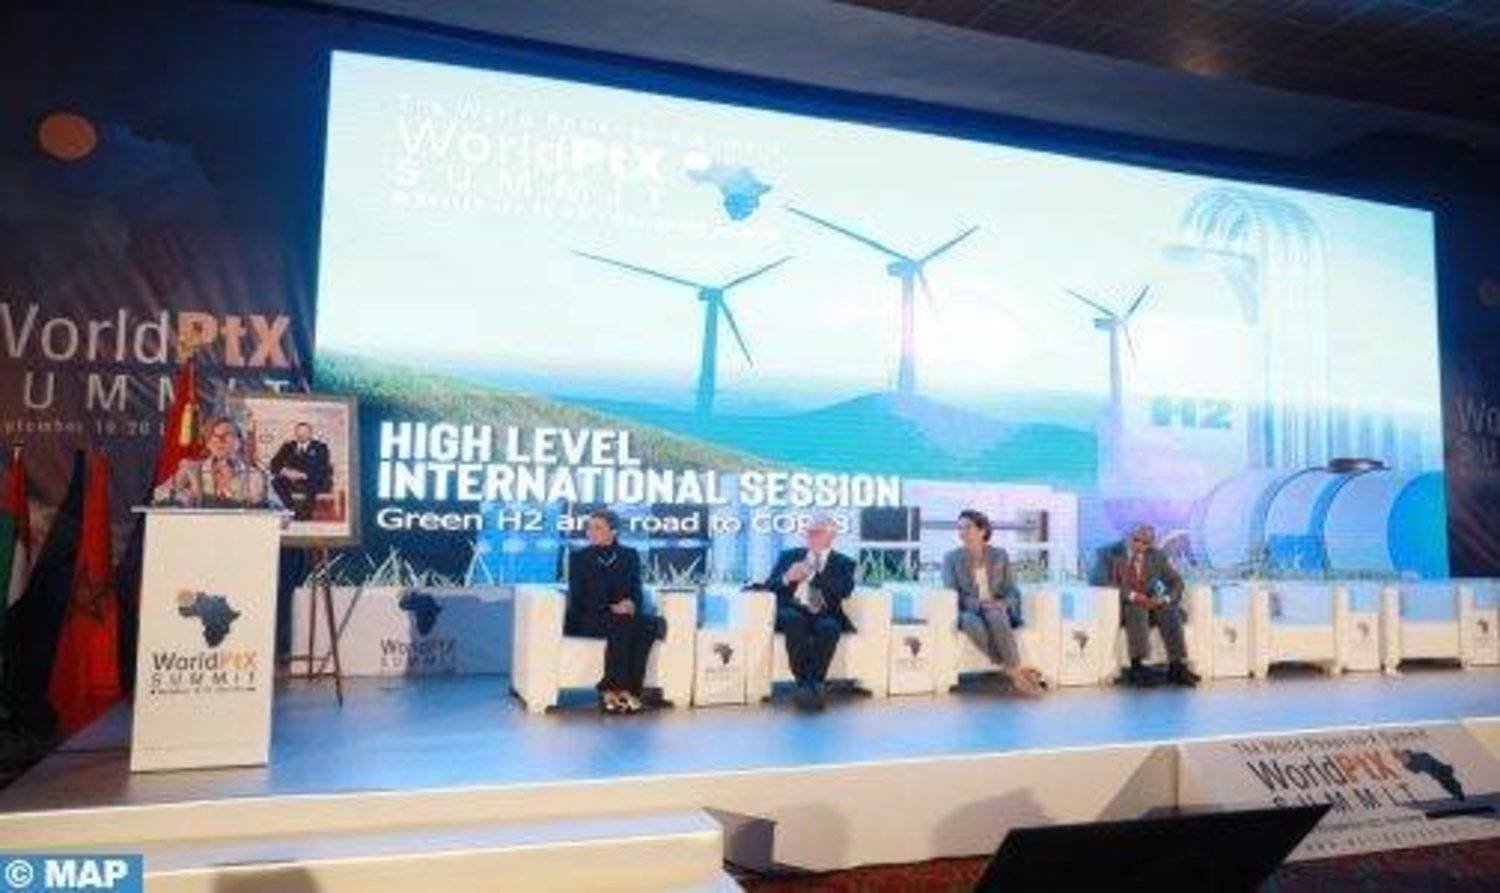 One of the sessions of the third edition of the World-to-X Summit, which was held in Marrakesh (Asharq Al-Awsat)